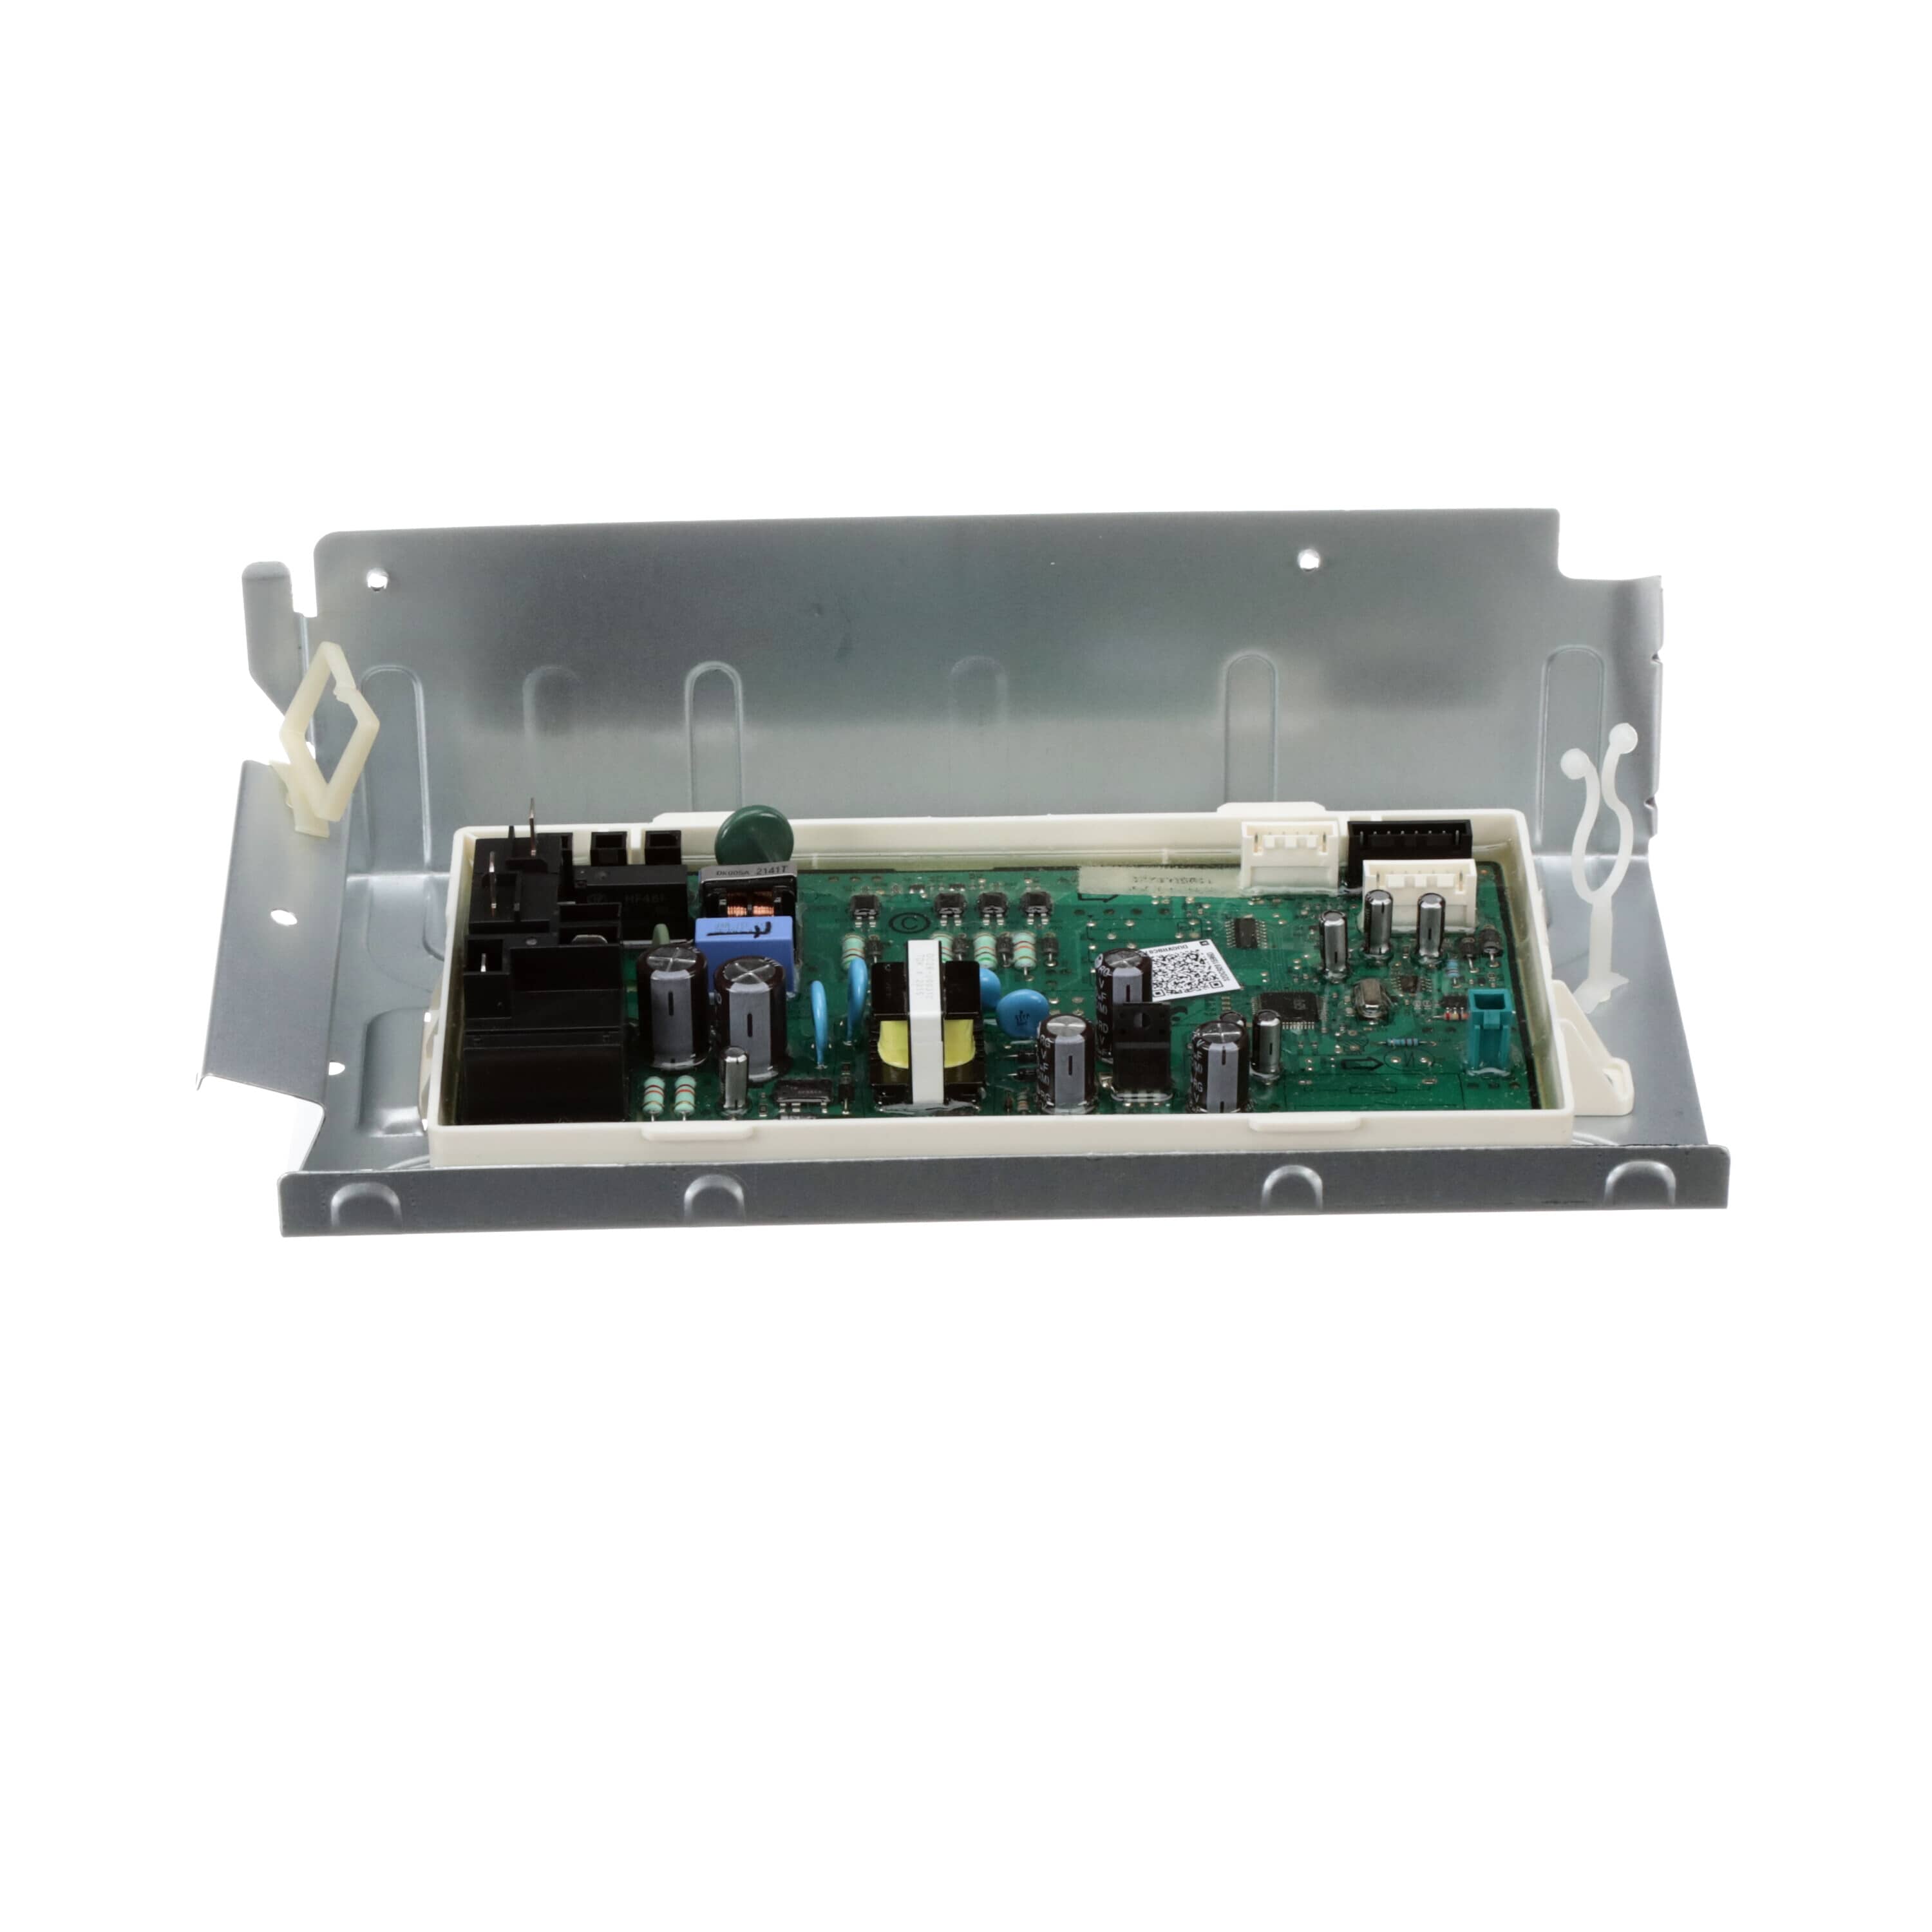 Samsung DC92-01596D Dryer Electronic Control Board - Samsung Parts USA